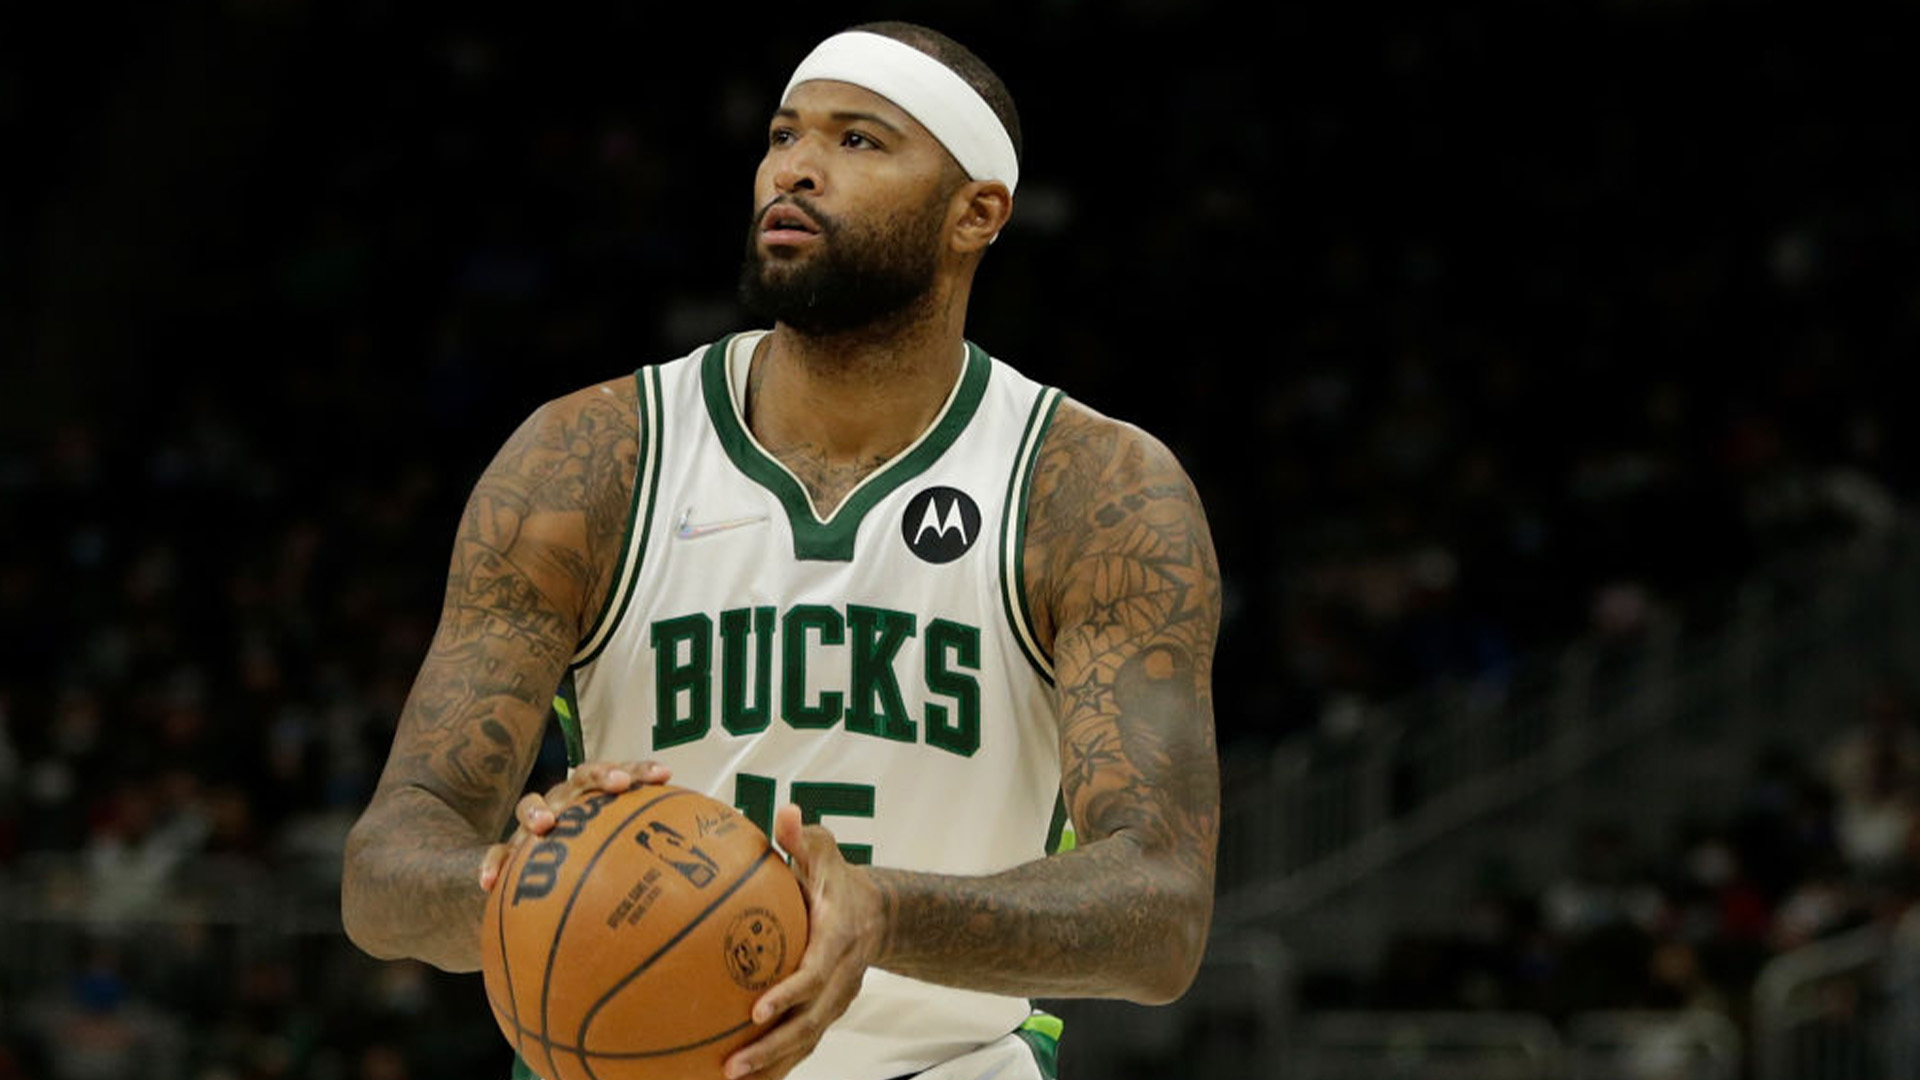 DeMarcus Cousins Says When He Was A College Athlete, Players Were ‘Robbed’ And NIL Deals ‘Ain’t Nothing But Reparations’